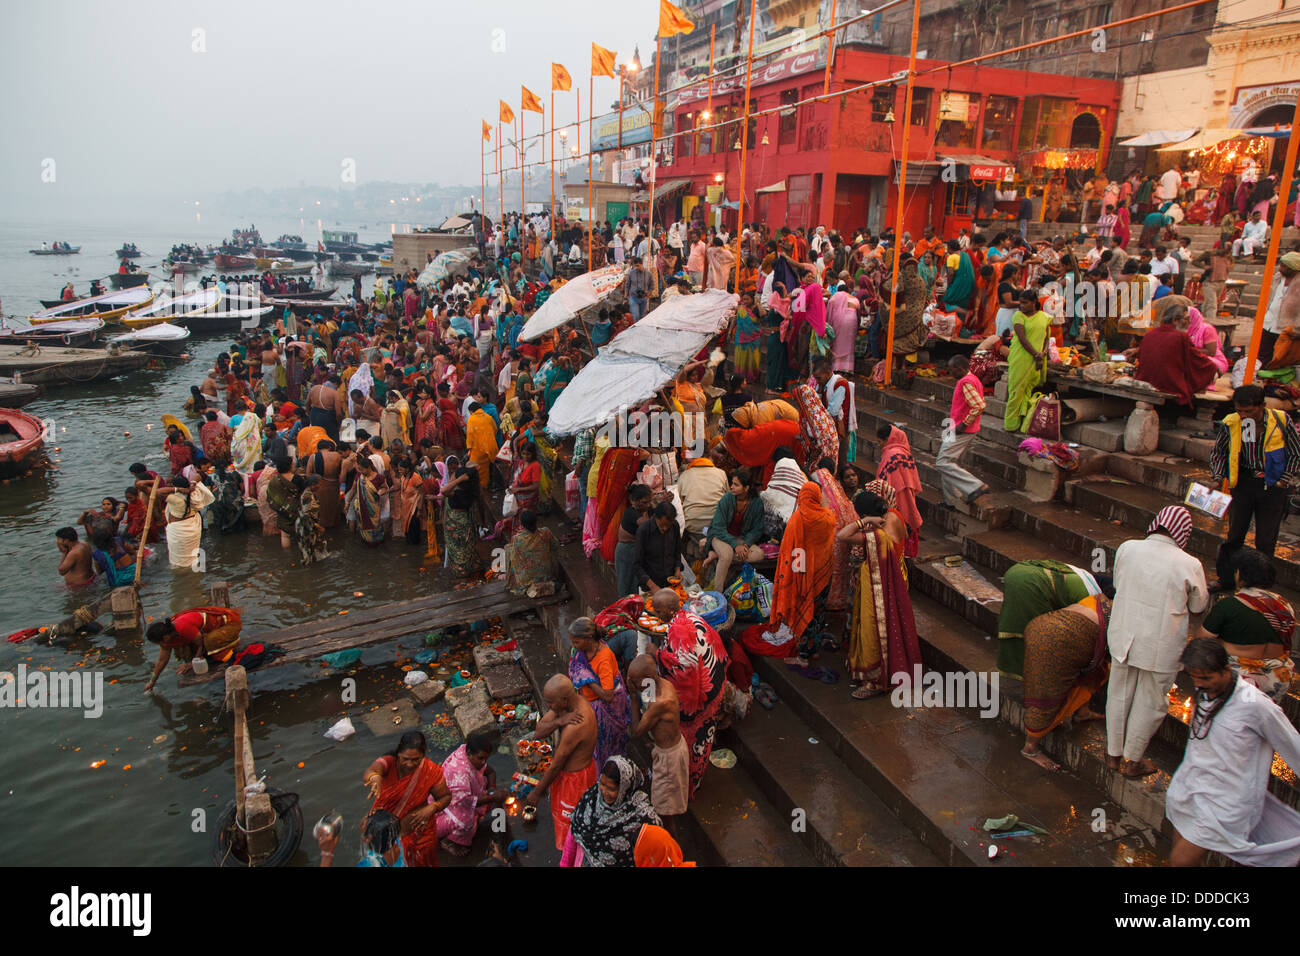 Indian Hindu pilgrims and devotees bathe in Ganges in the morning of one of Diwali festival days in Varanasi, India. 2012 Stock Photo